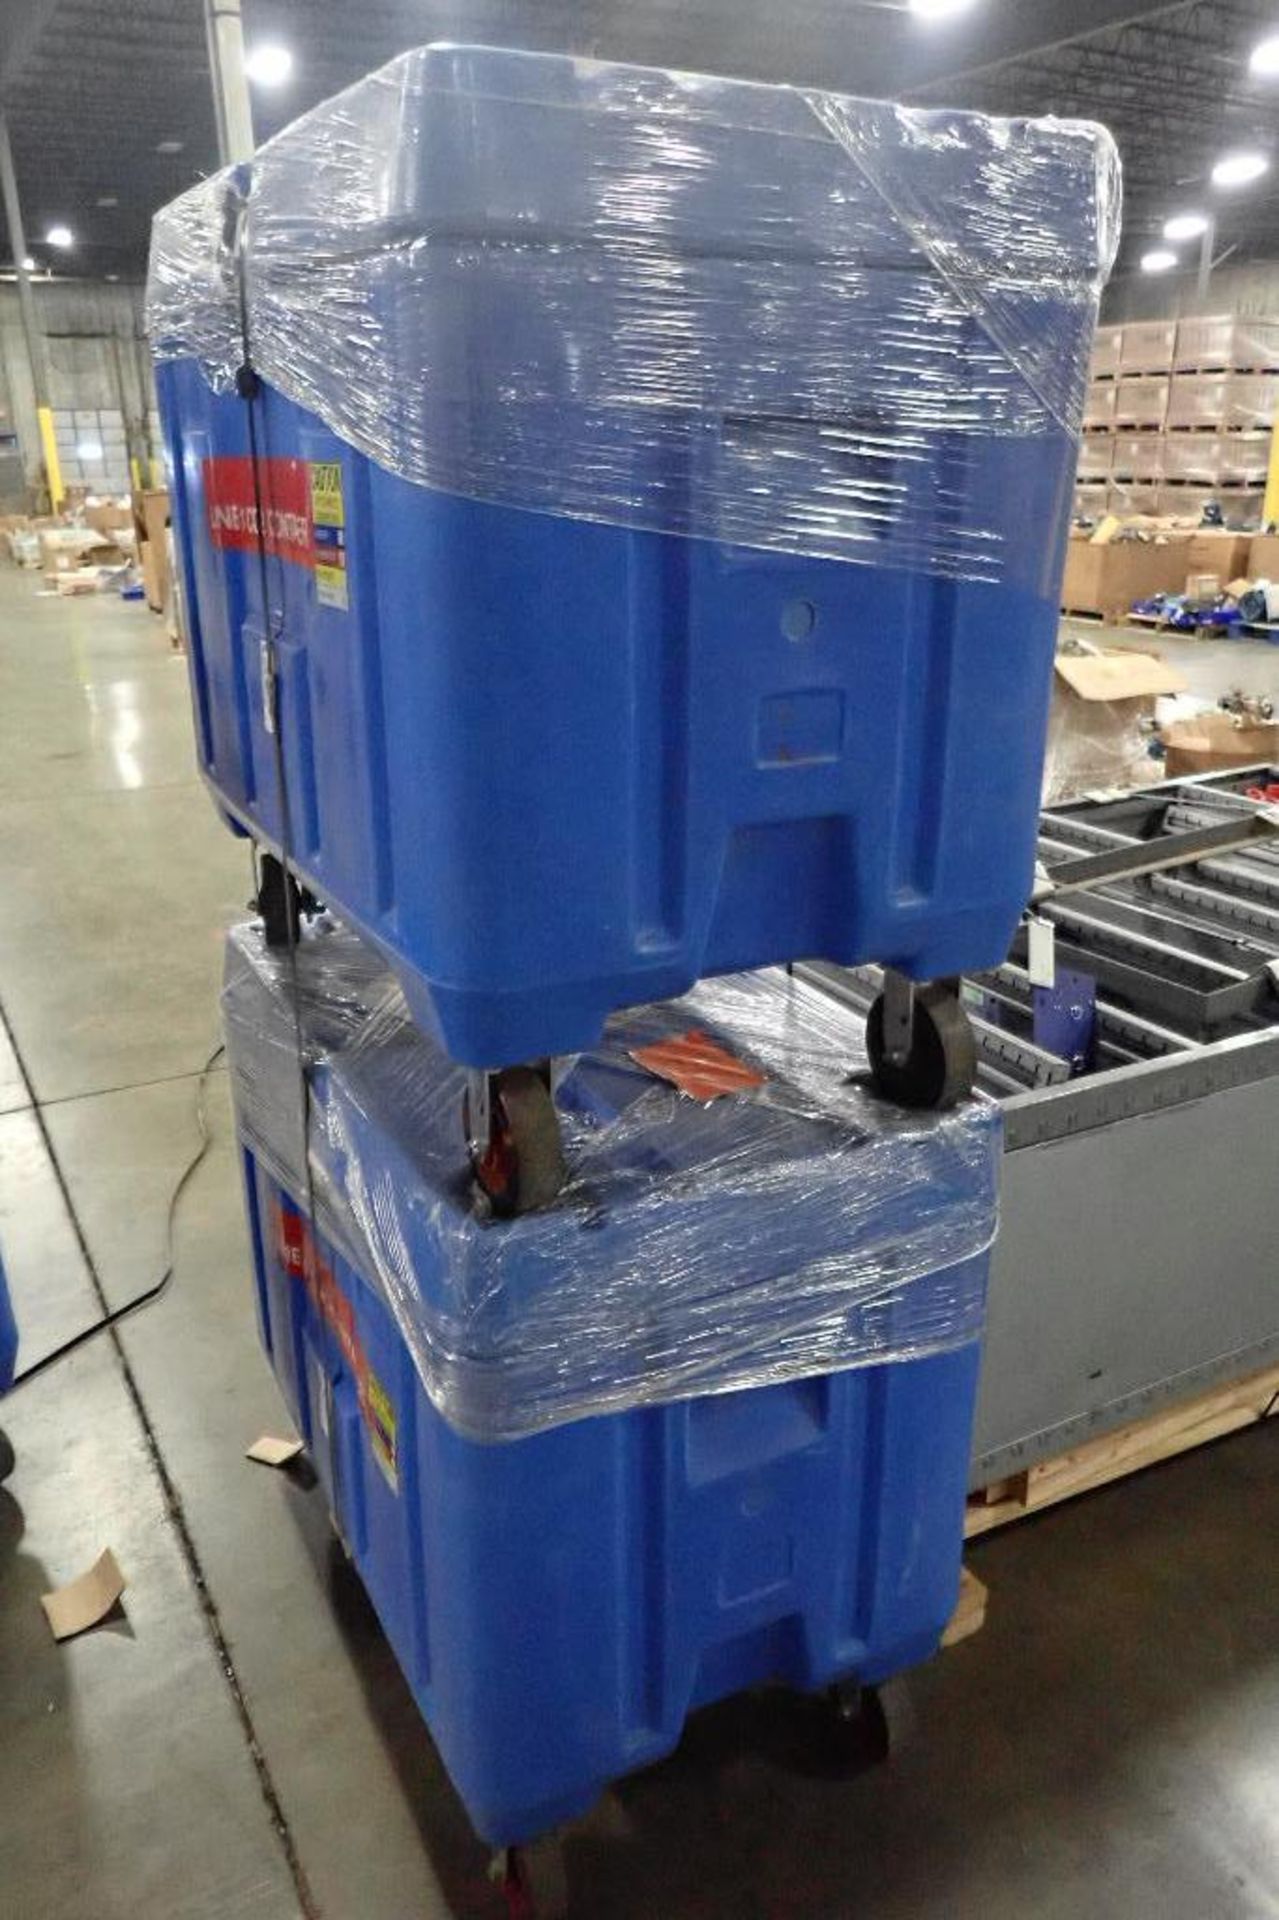 Bonar plastics insulated dry ice bins, 40 in. long x 27 in. wide x 24 in. deep, on wheels (EACH). ** - Image 4 of 4